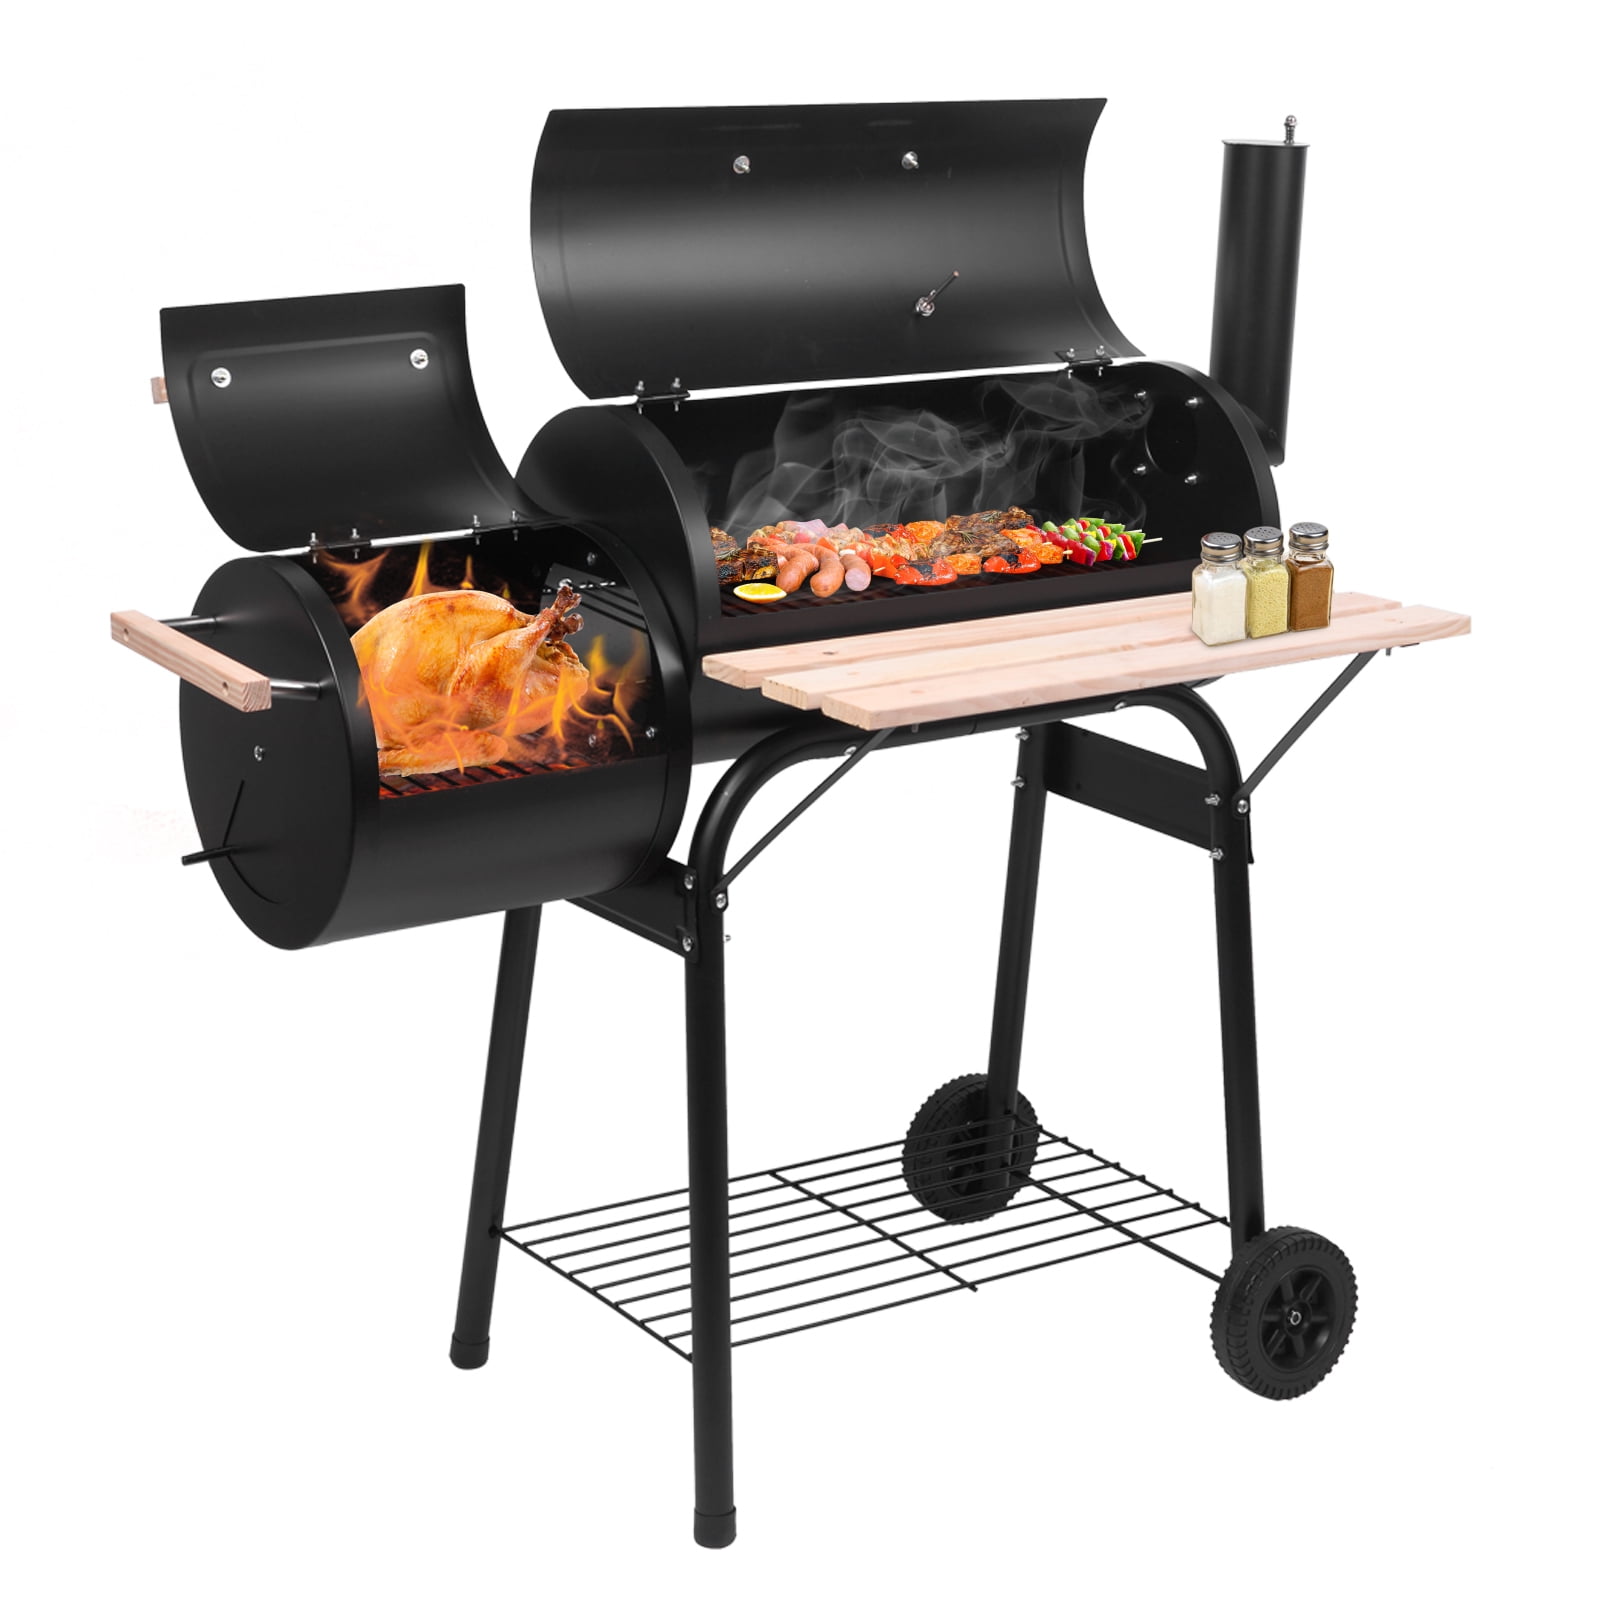 Zimtown Outdoor BBQ Charcoal Grill with Offset Smoker